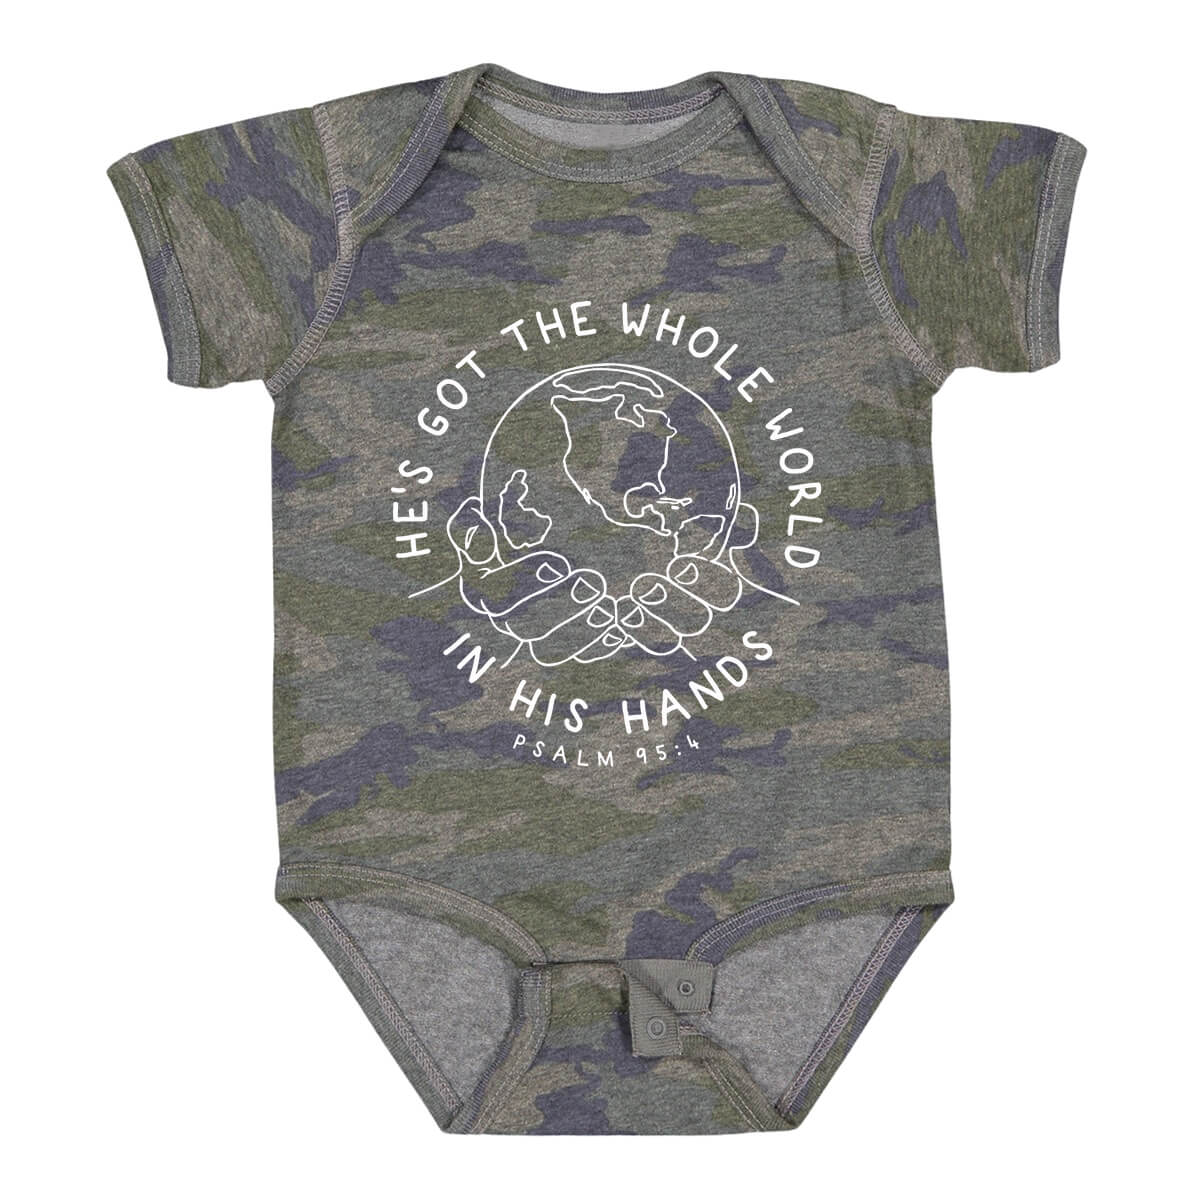 He's Got The Whole World In His Hands Infant Bodysuit Onesie